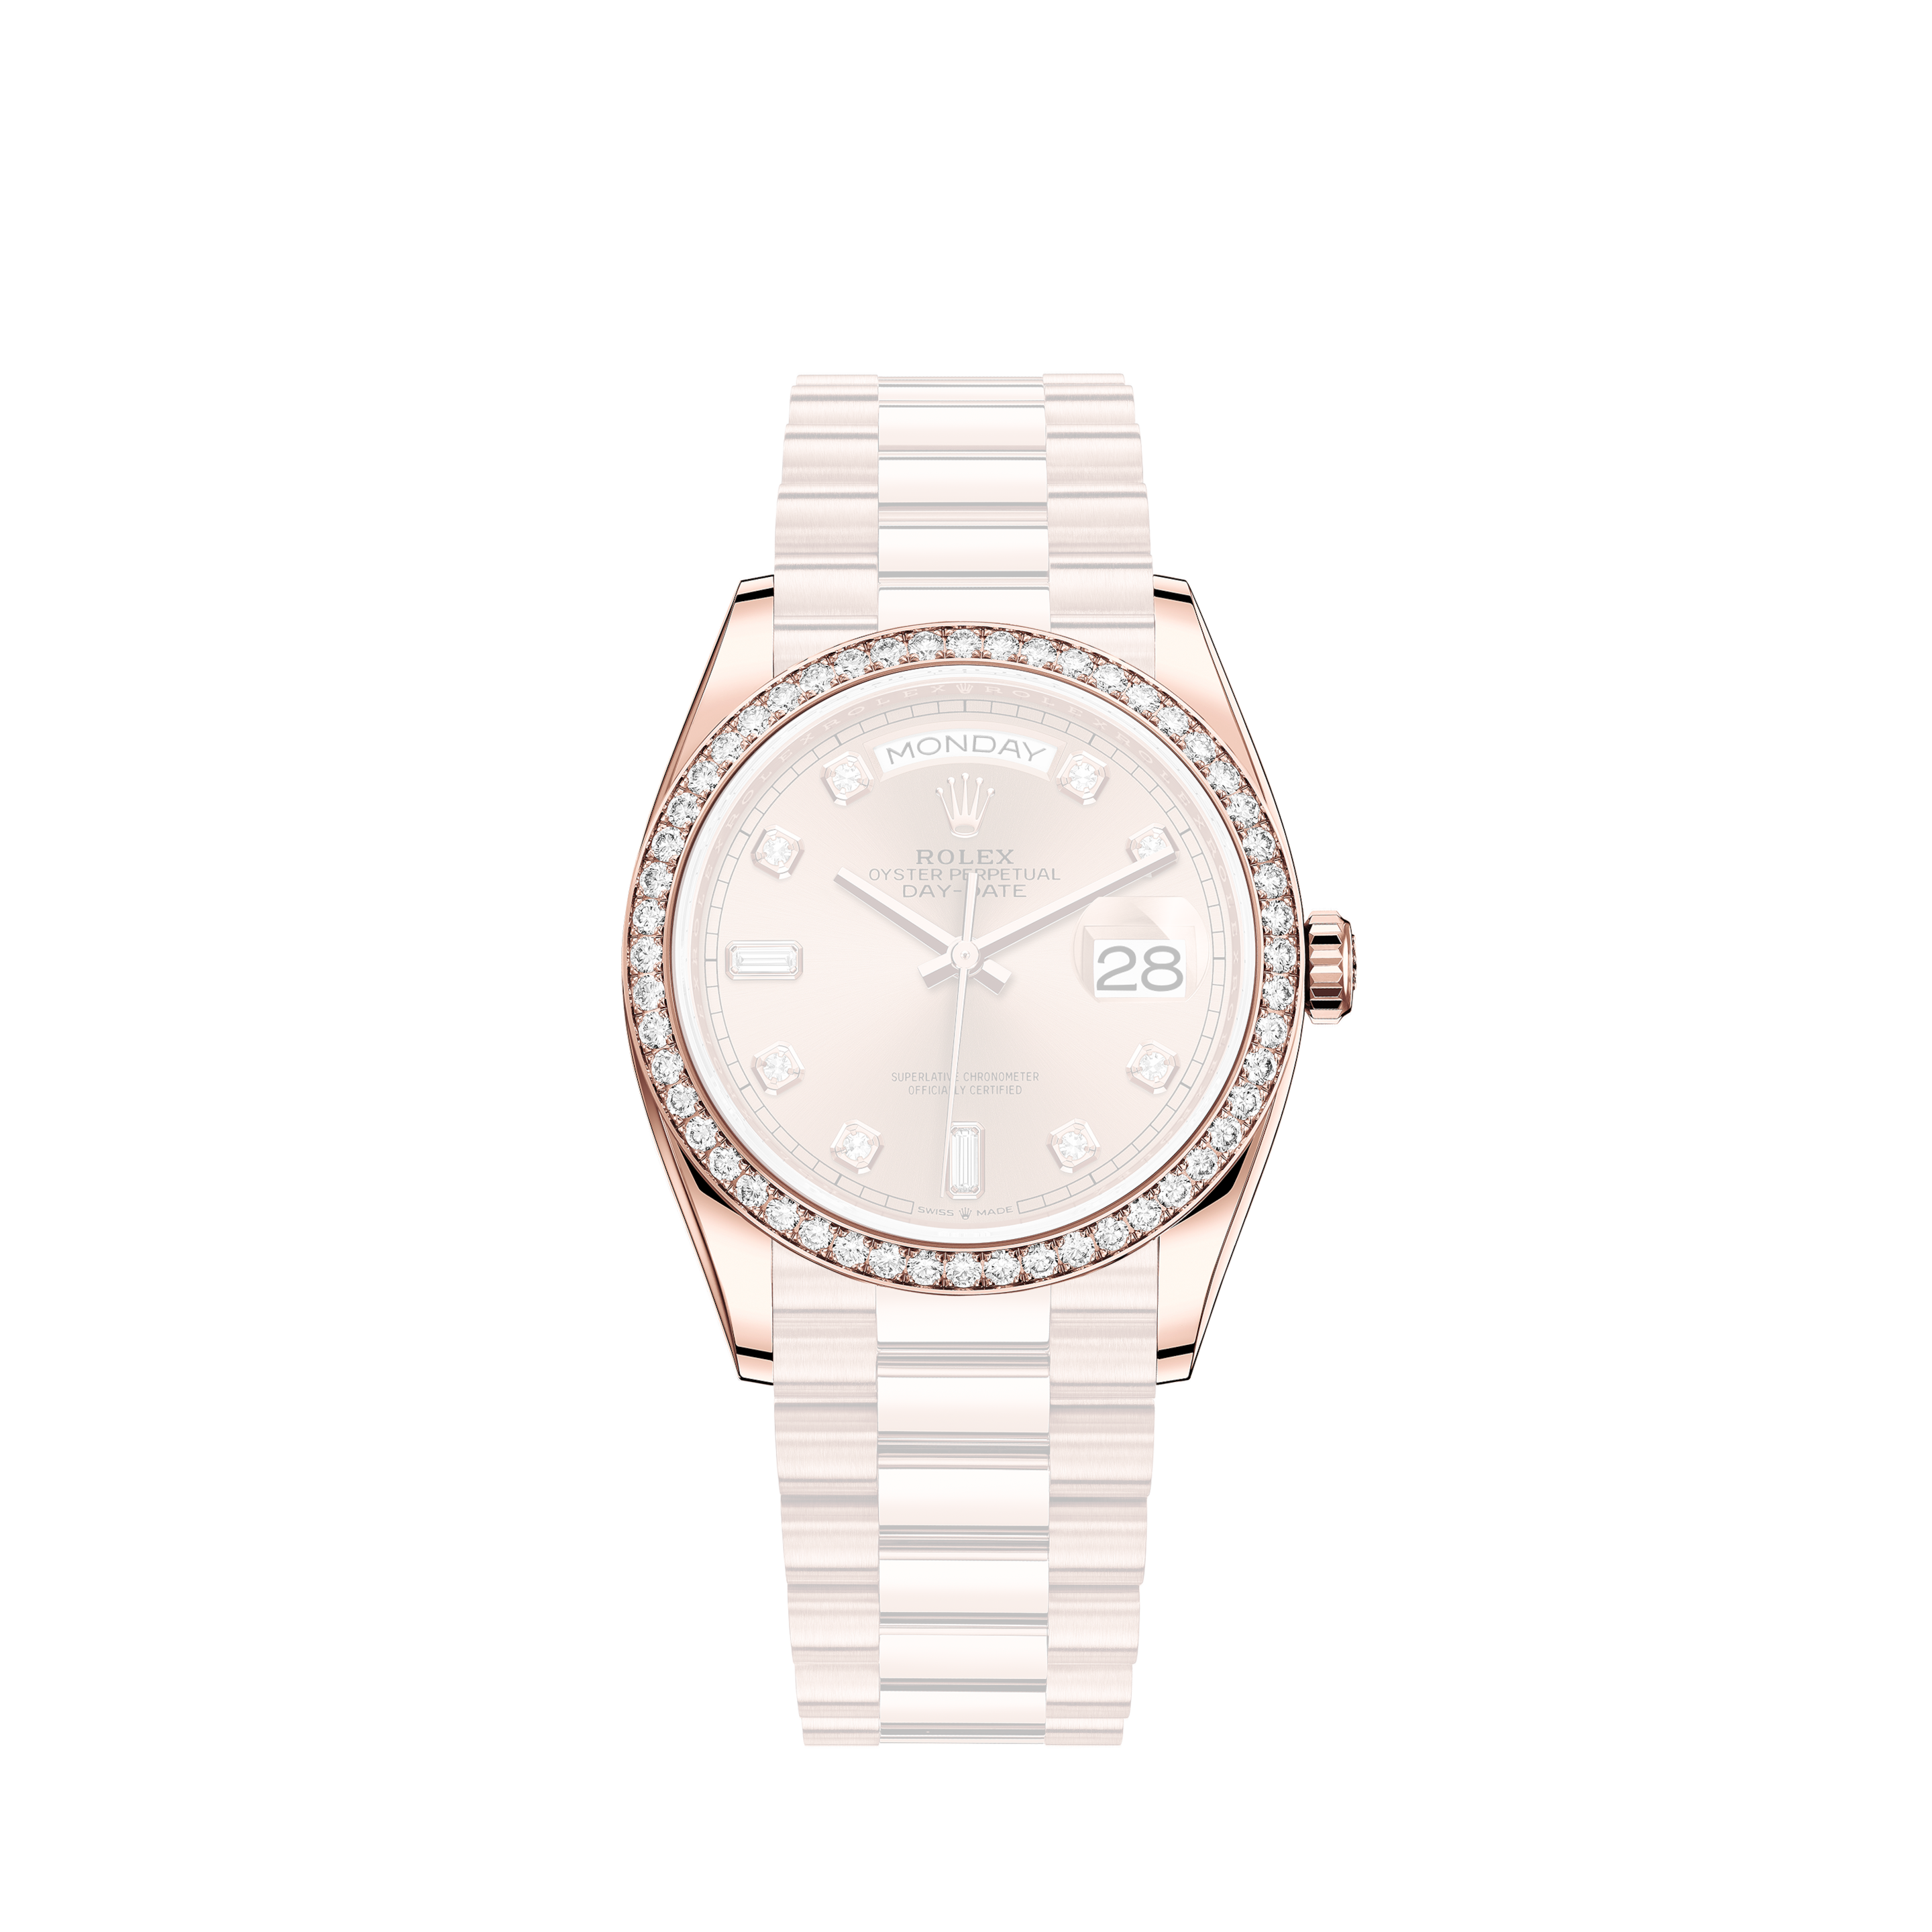 Rolex Men's Customized Rolex watch 36mm Datejust Pink MOP Mother Of Pearl Dial with Diamond Accent